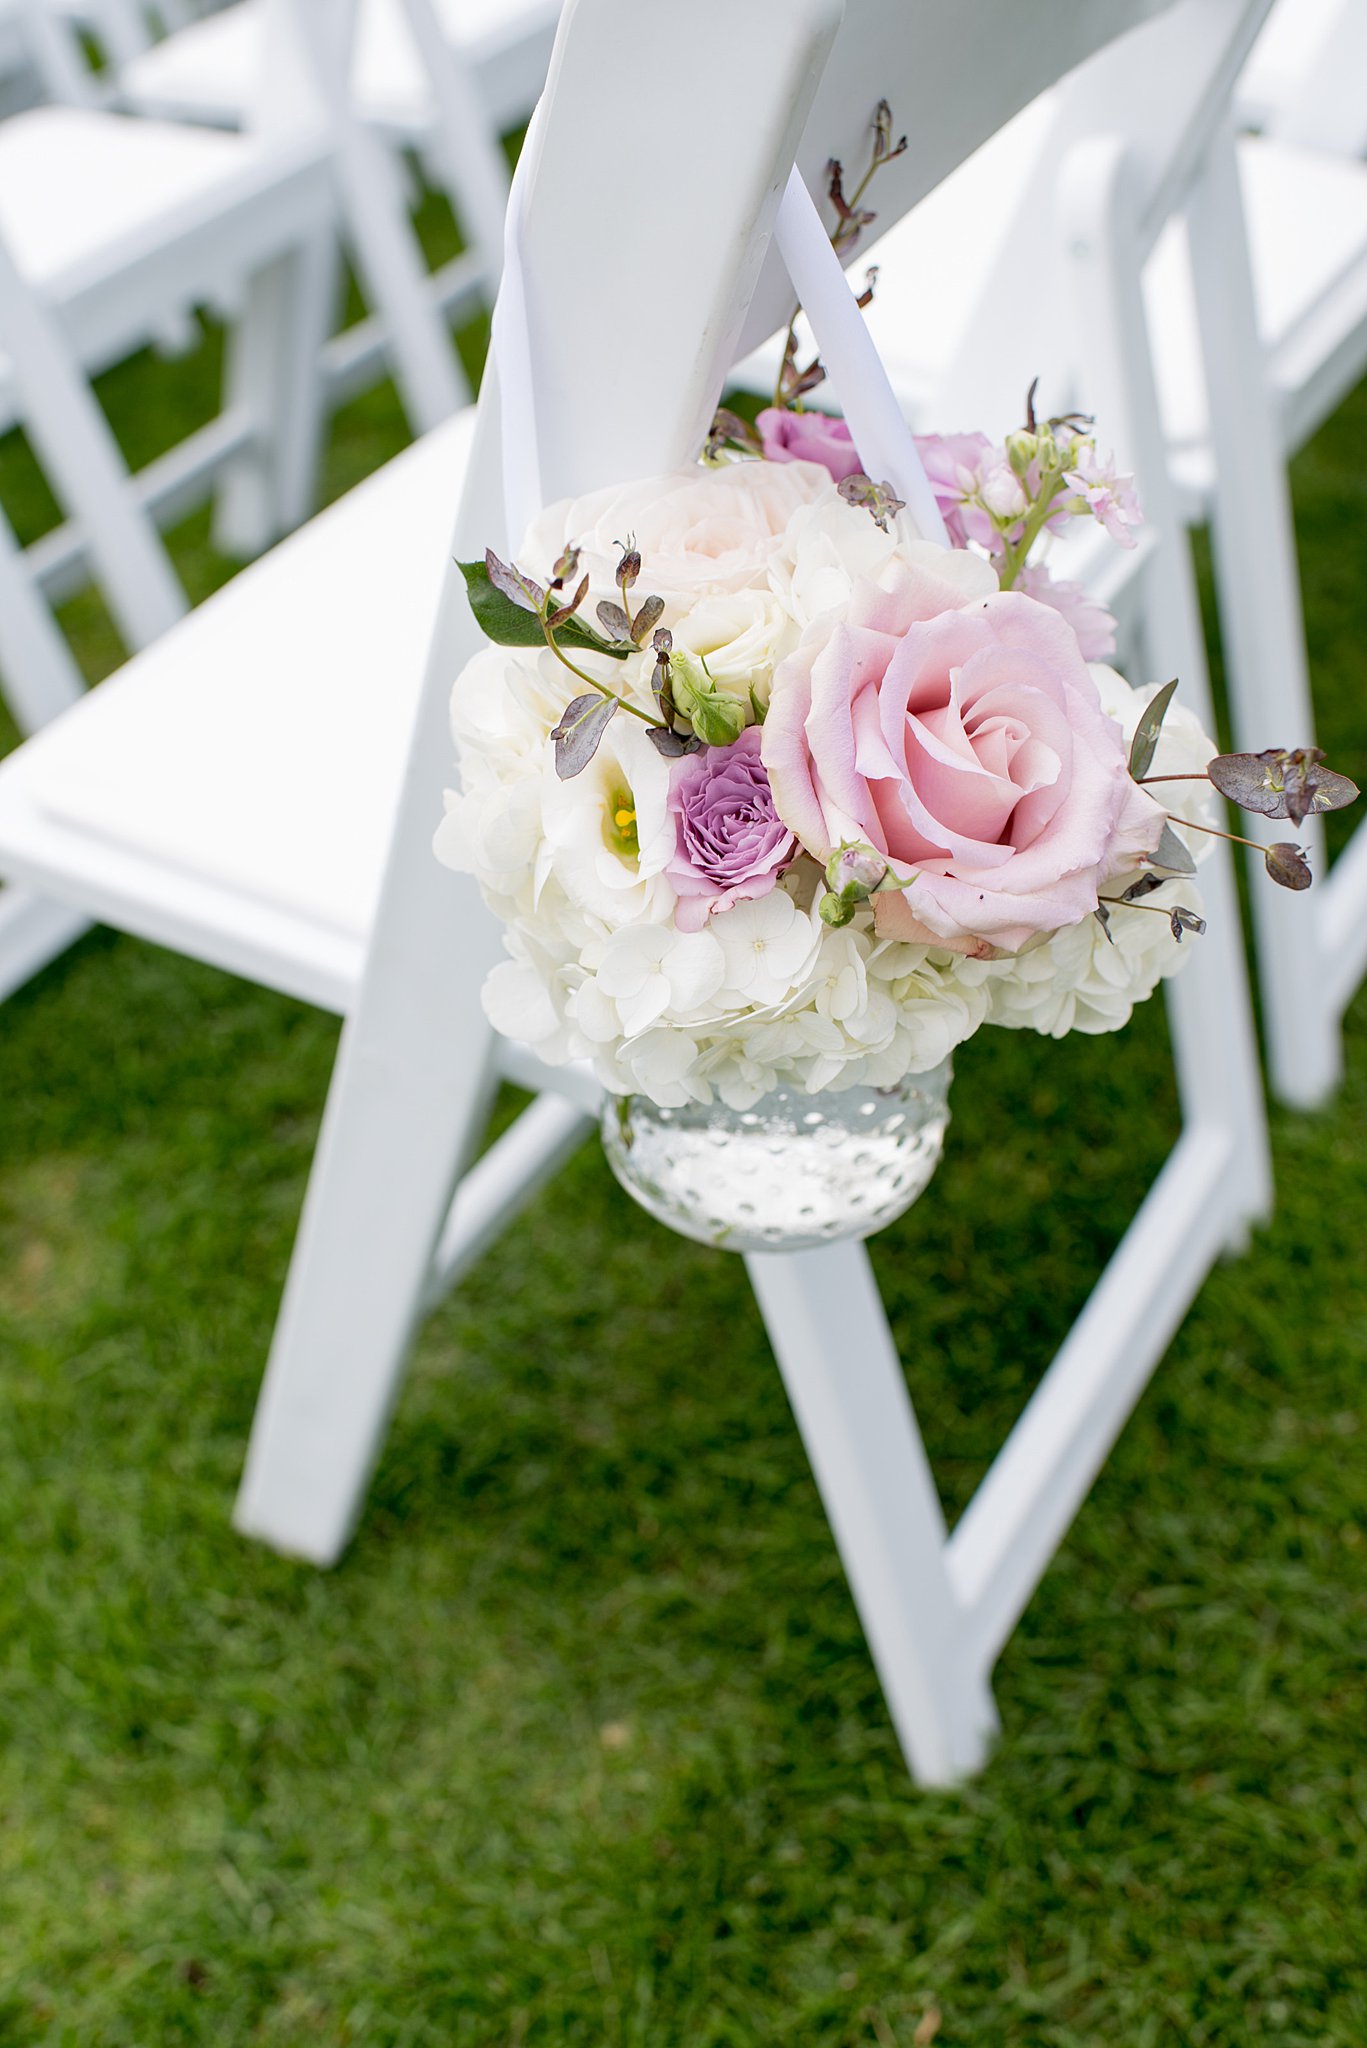 Details of a pink and white floral hanging on a chair at a wedding ceremony